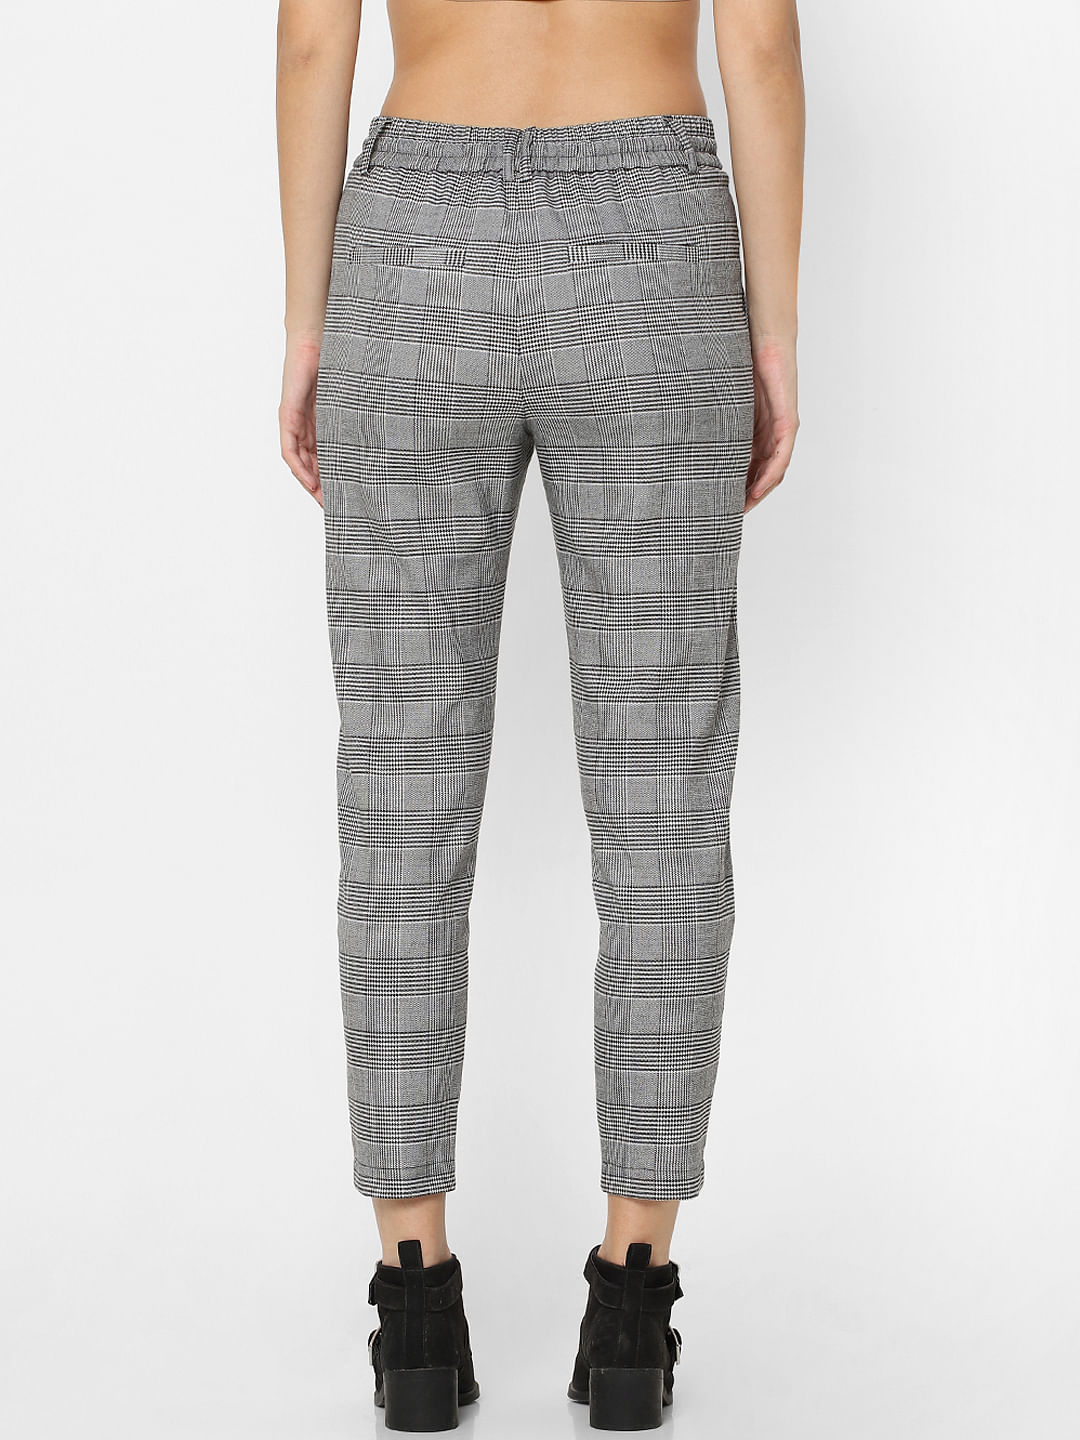 Buy STOP Grey Womens Checked Trousers  Shoppers Stop